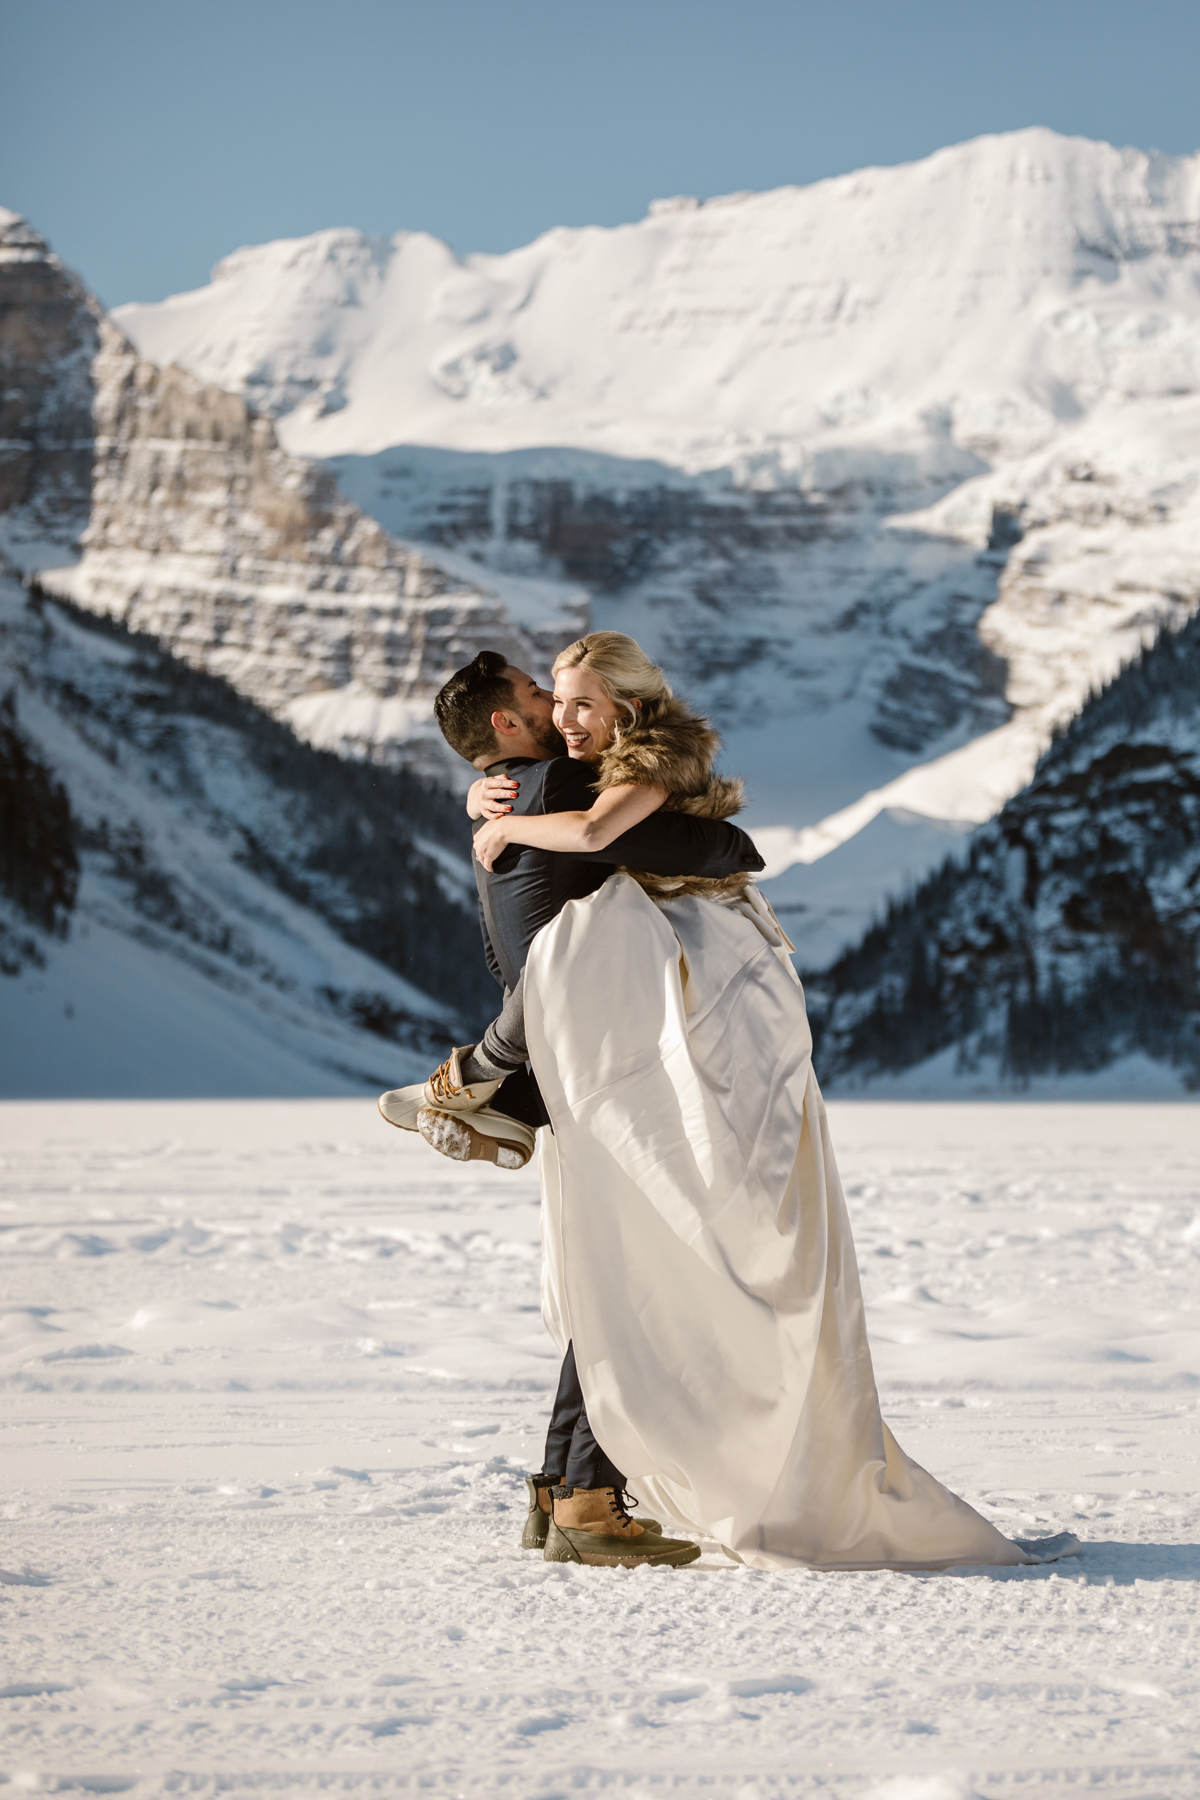 Fairmont Chateau Lake Louise Wedding Photography in Winter - Image 23